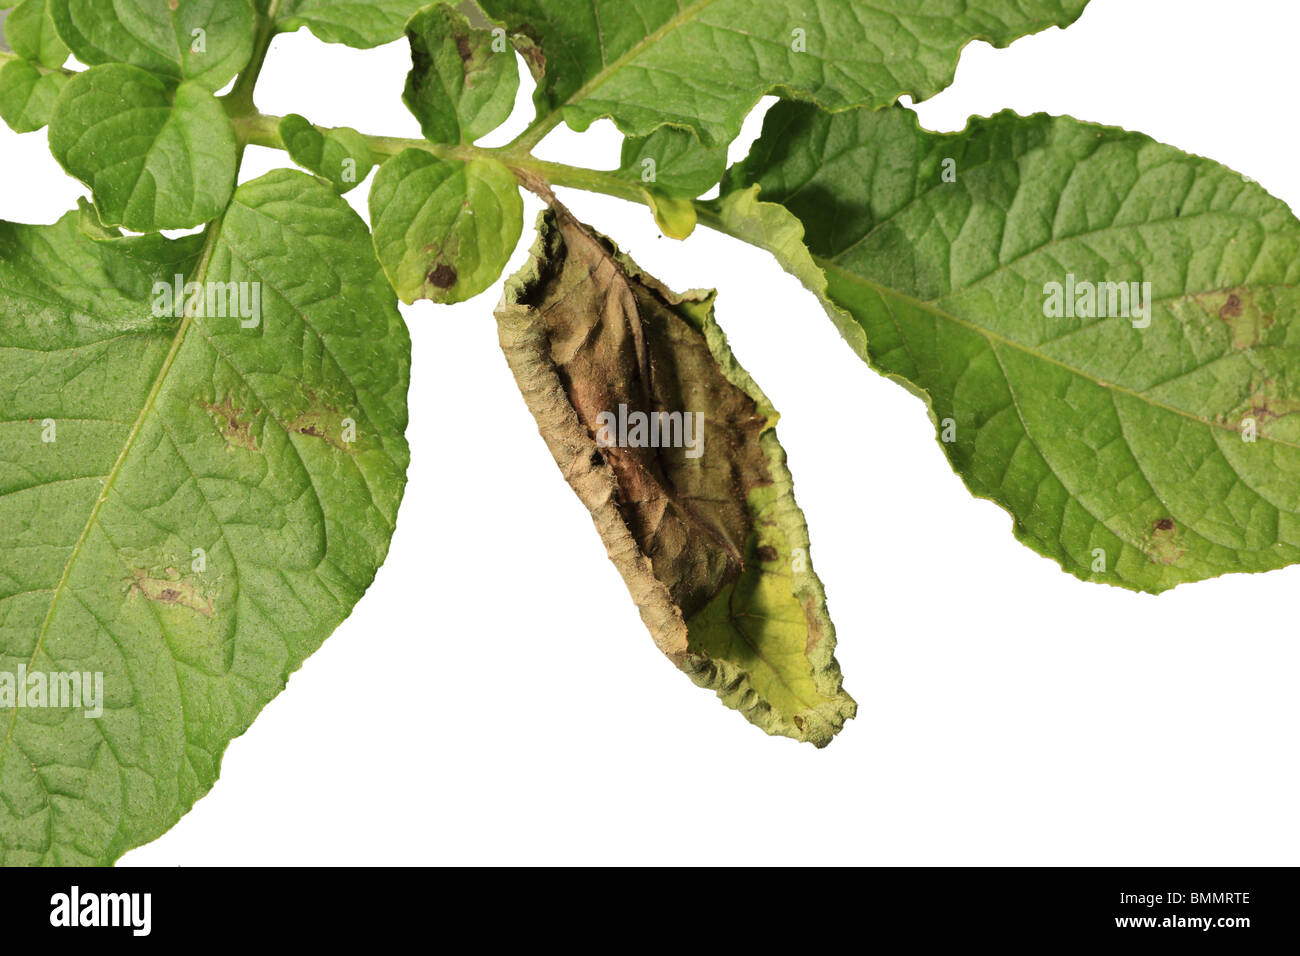 POTATO BLIGHT (Phytophthora infestans) SHOWING INFECTED LEAF TOP SURFACE CUT OUT Stock Photo